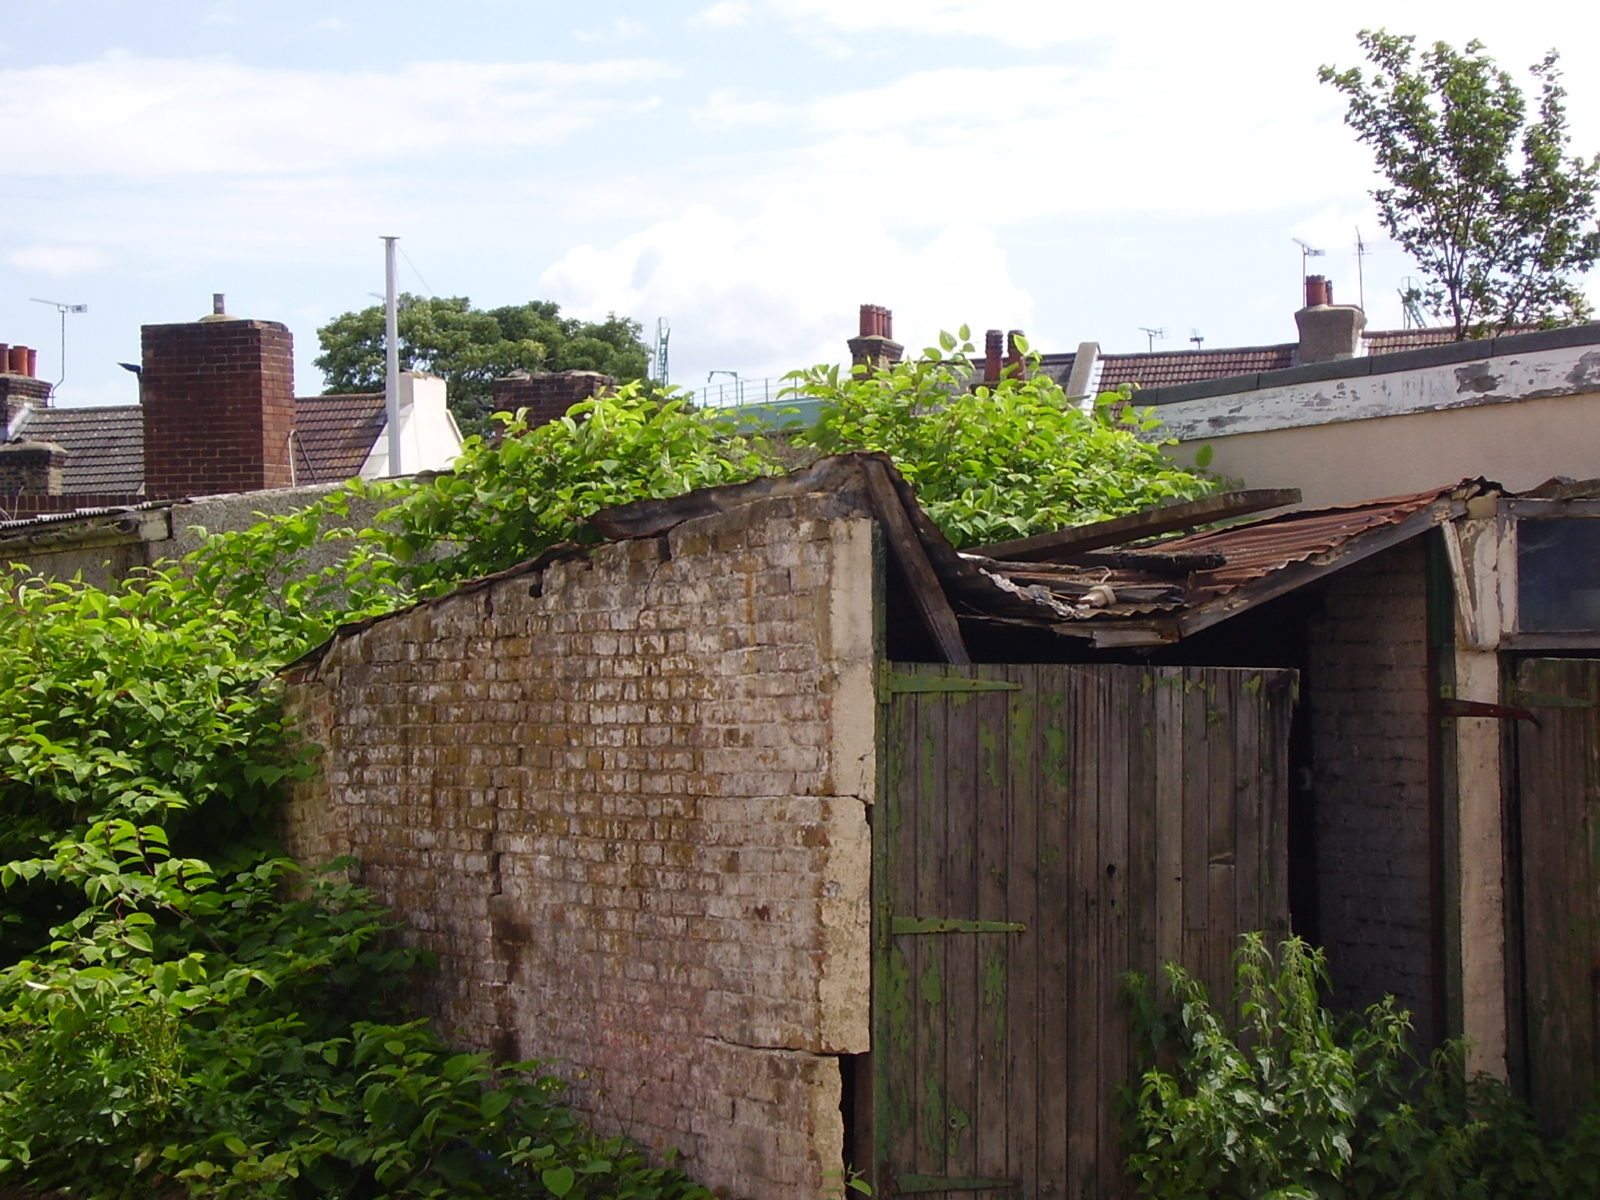 Japanese knotweed growing out of derelict garage roof